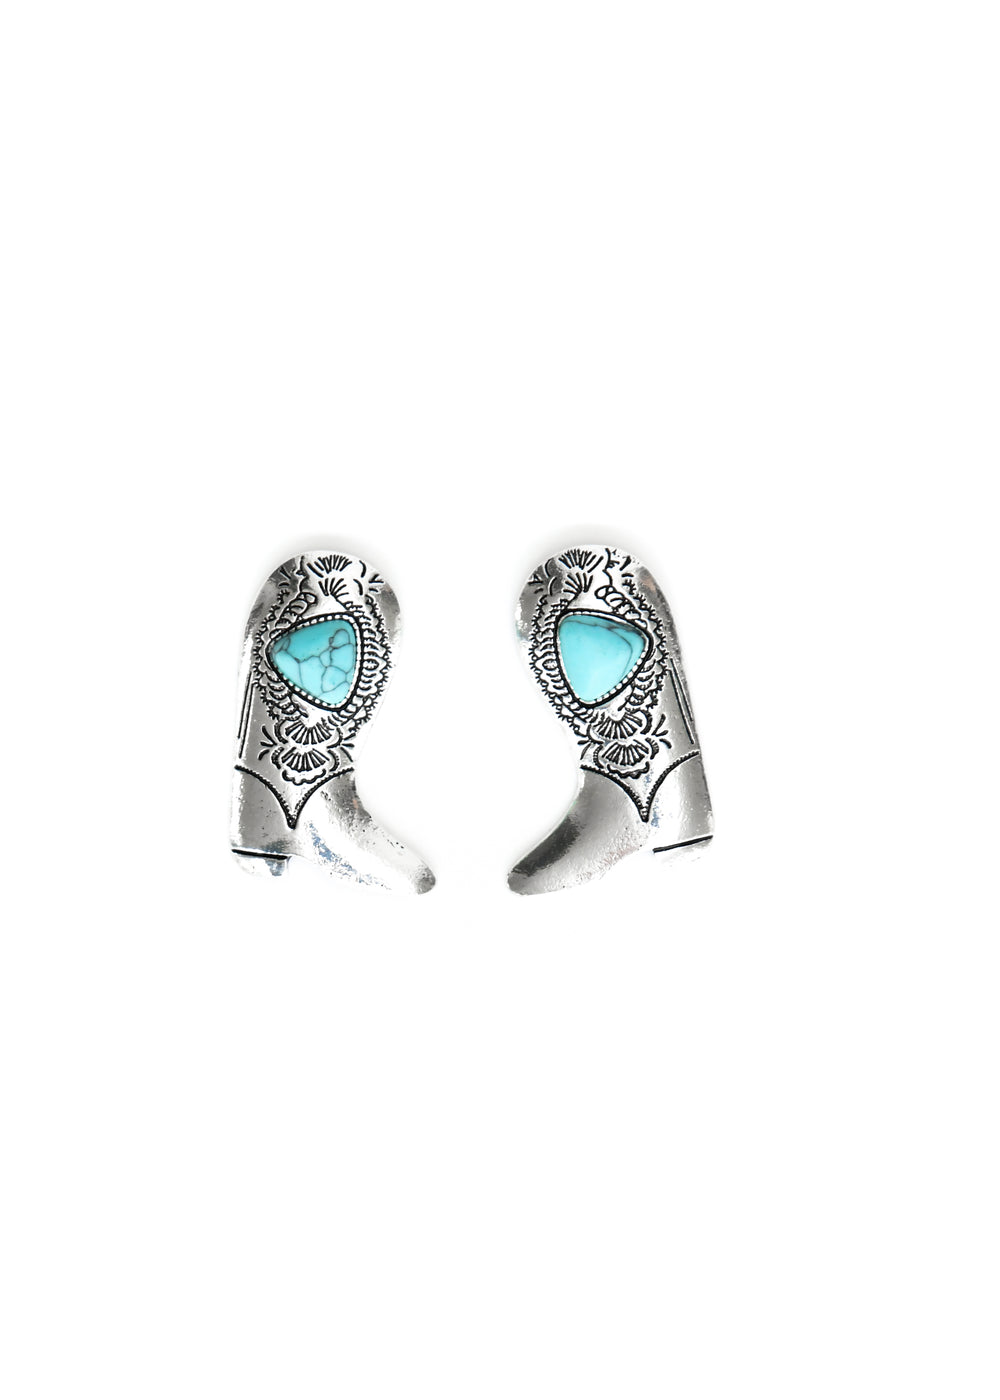 Silver Cowboy Boot Post Earrings with Turquoise Accent